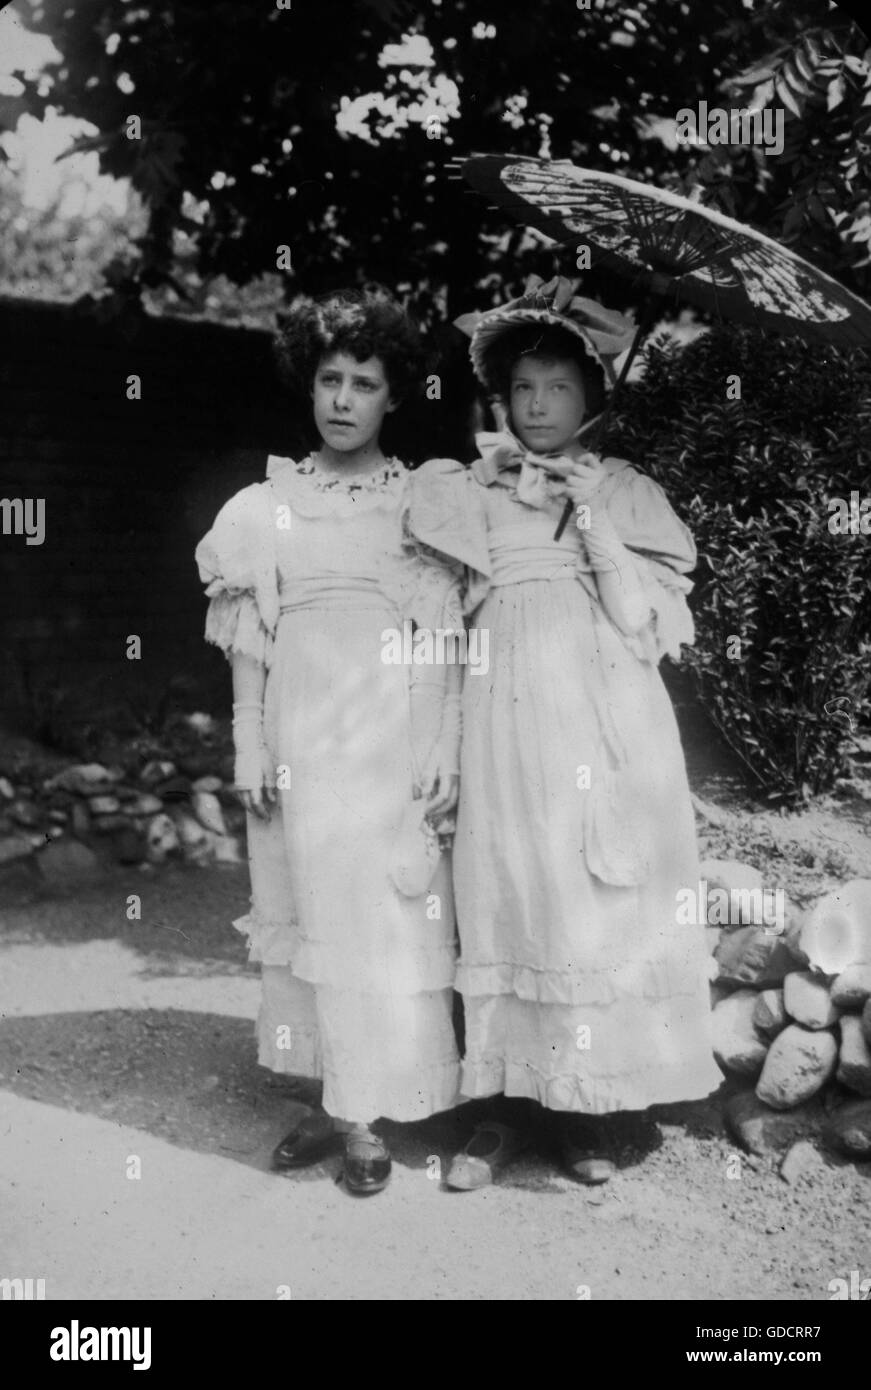 Two girls is summer frocks with parasol from a collection of amateur holiday photos c1899, venue appears to be Hastings. Photograph by Tony Henshaw -Taken from early original glass slides (original positive images). FROM THE 1899 HASTINGS FAMILY COLLECTION Stock Photo